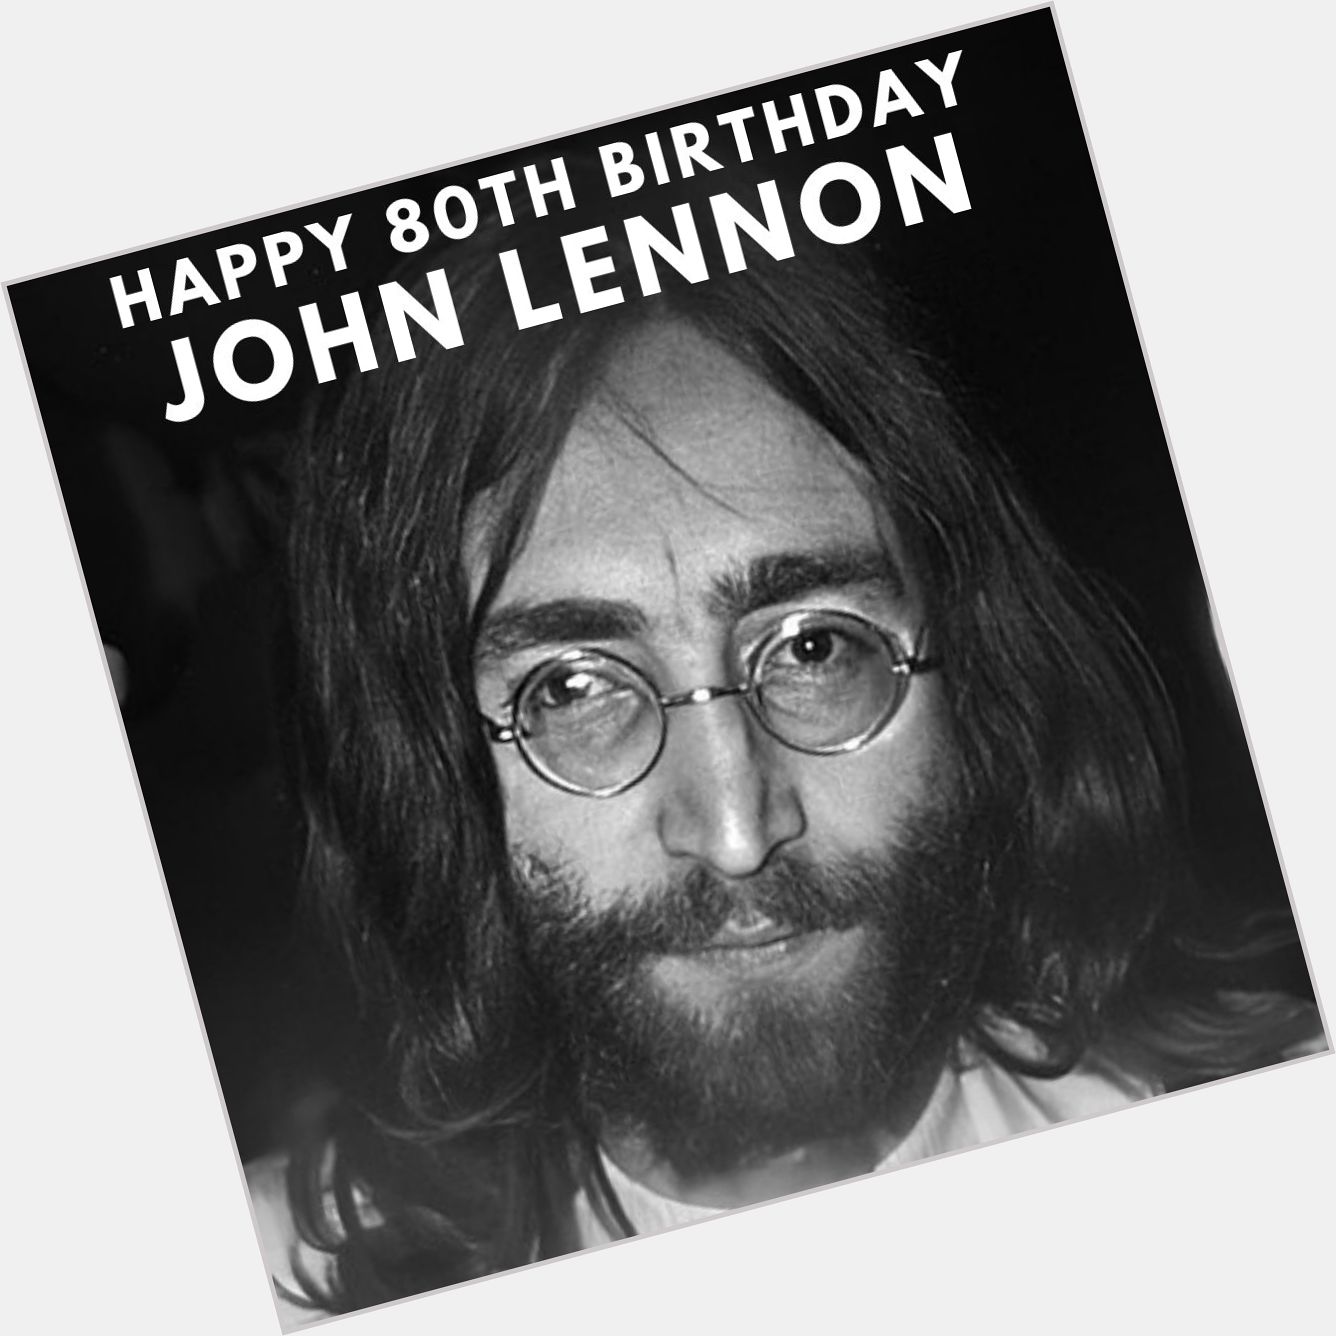  If John Lennon were alive, today would be his 80th birthday. Happy birthday, Mr. Lennon! 